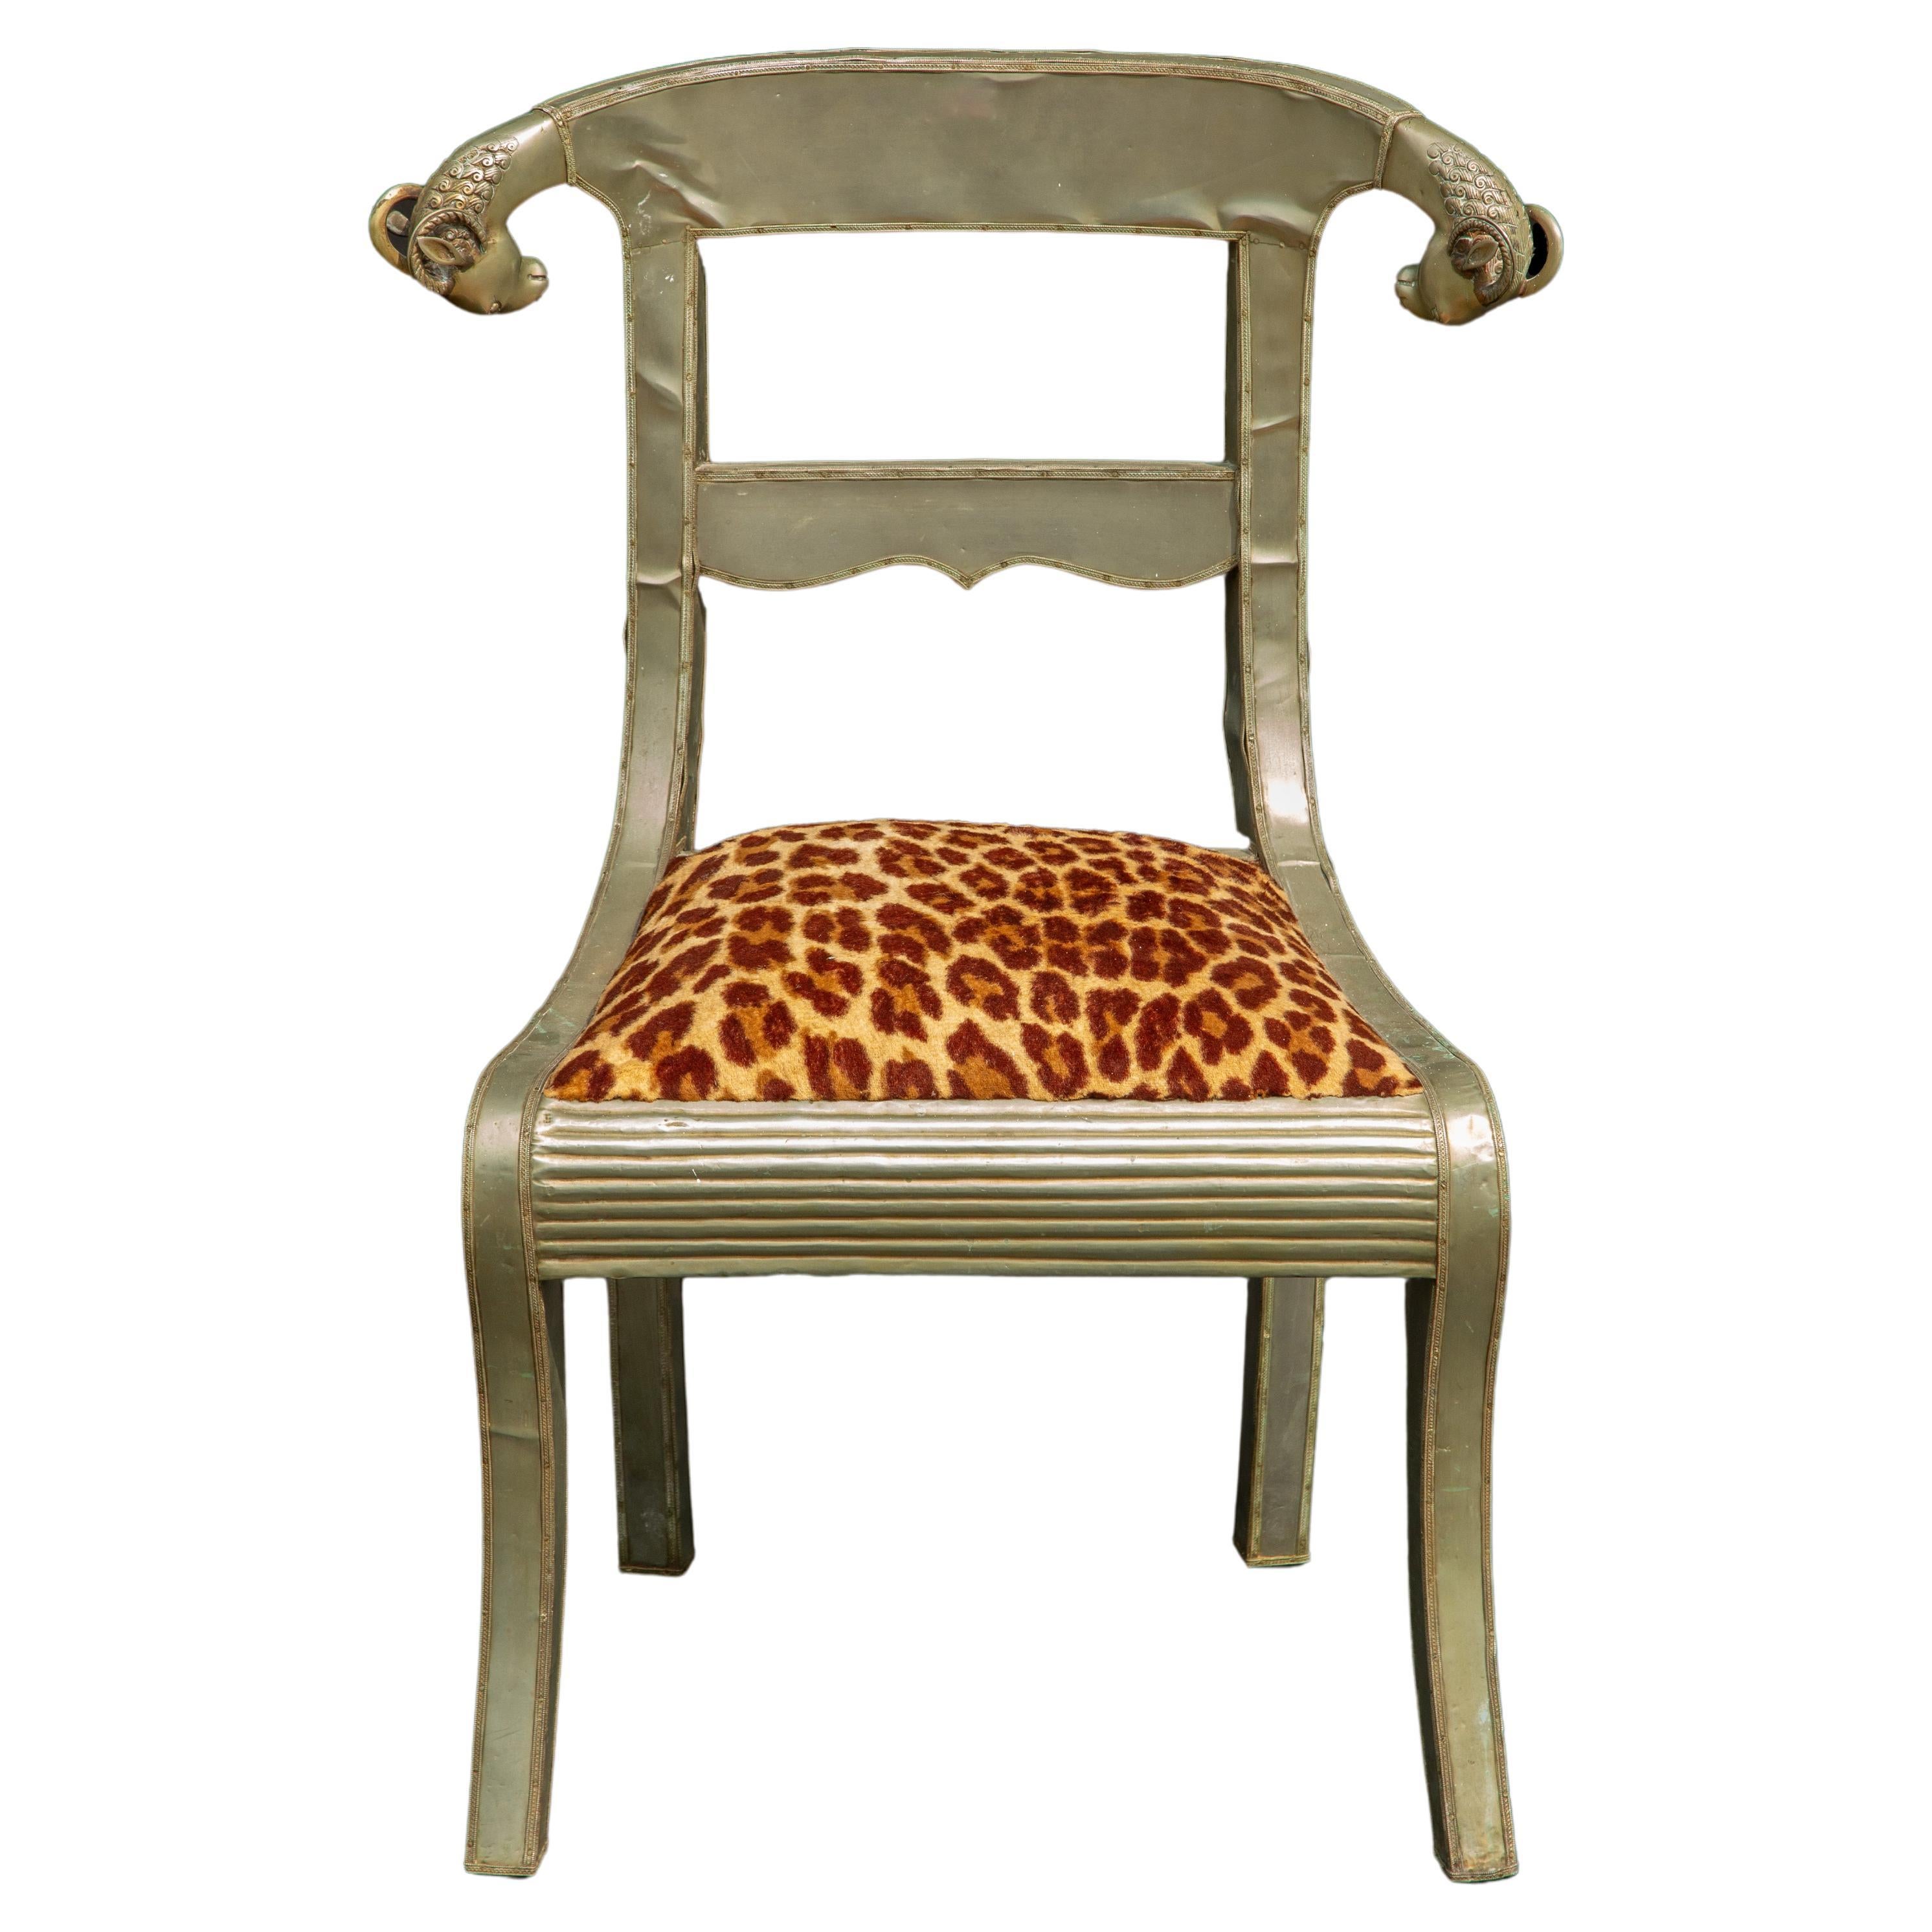 Anglo-Indian Dowry Chair: Regal Silvered Elegance w Rams' Heads & Leopard Seat For Sale